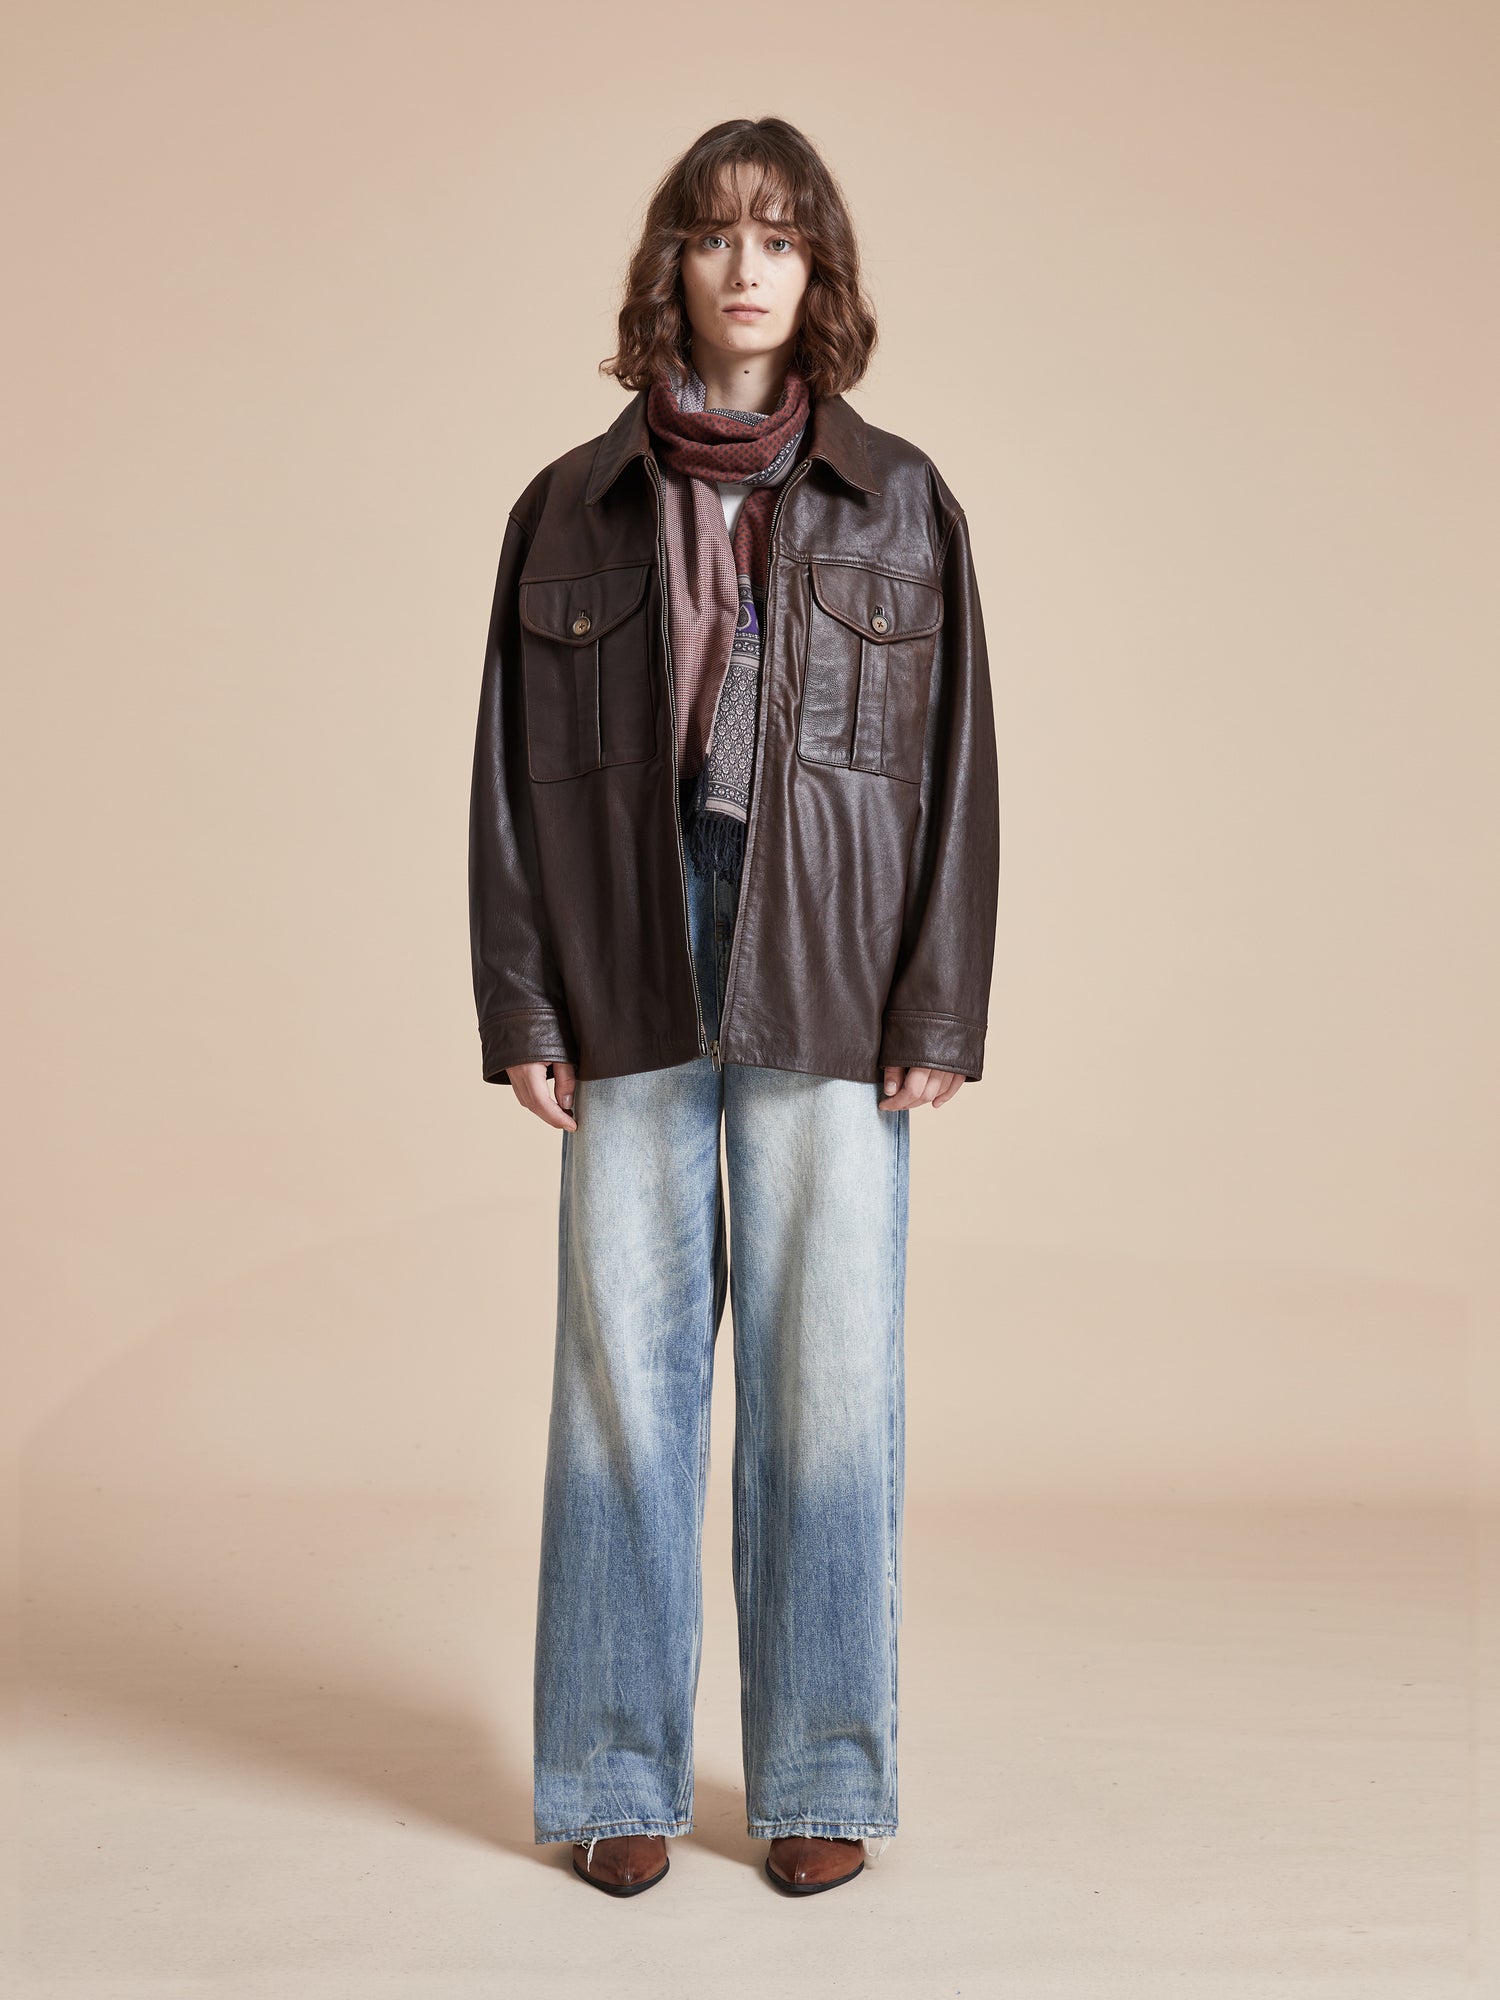 A model wearing a Found Sepia Leather Overshirt and jeans.